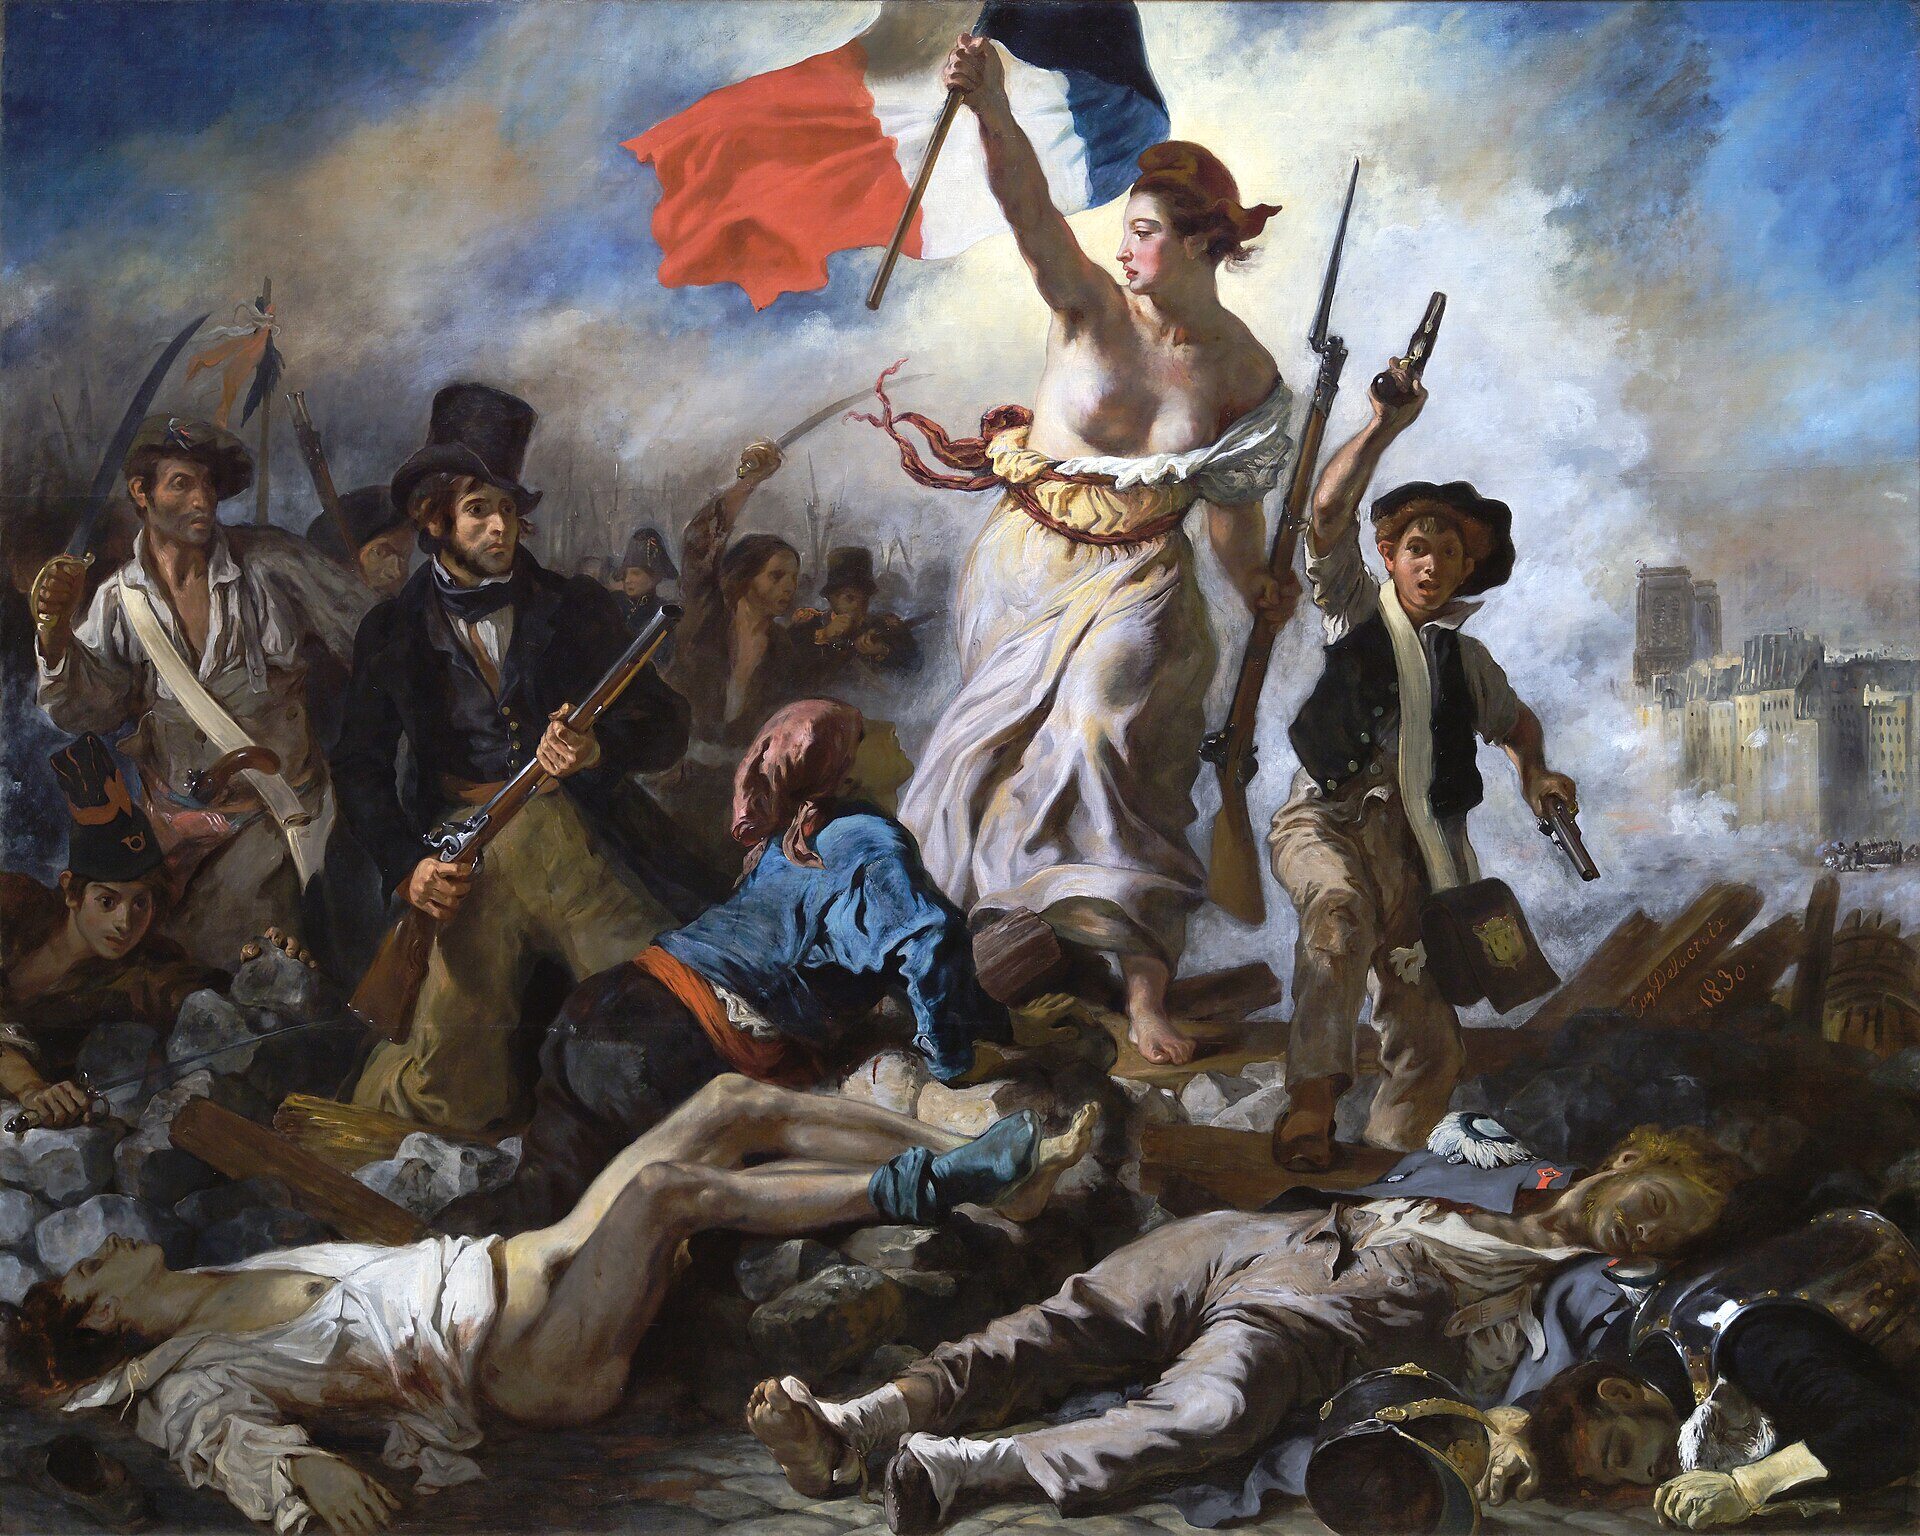 Liberty Leads The People through the French Revolution by Eugène Delacroix [1830]